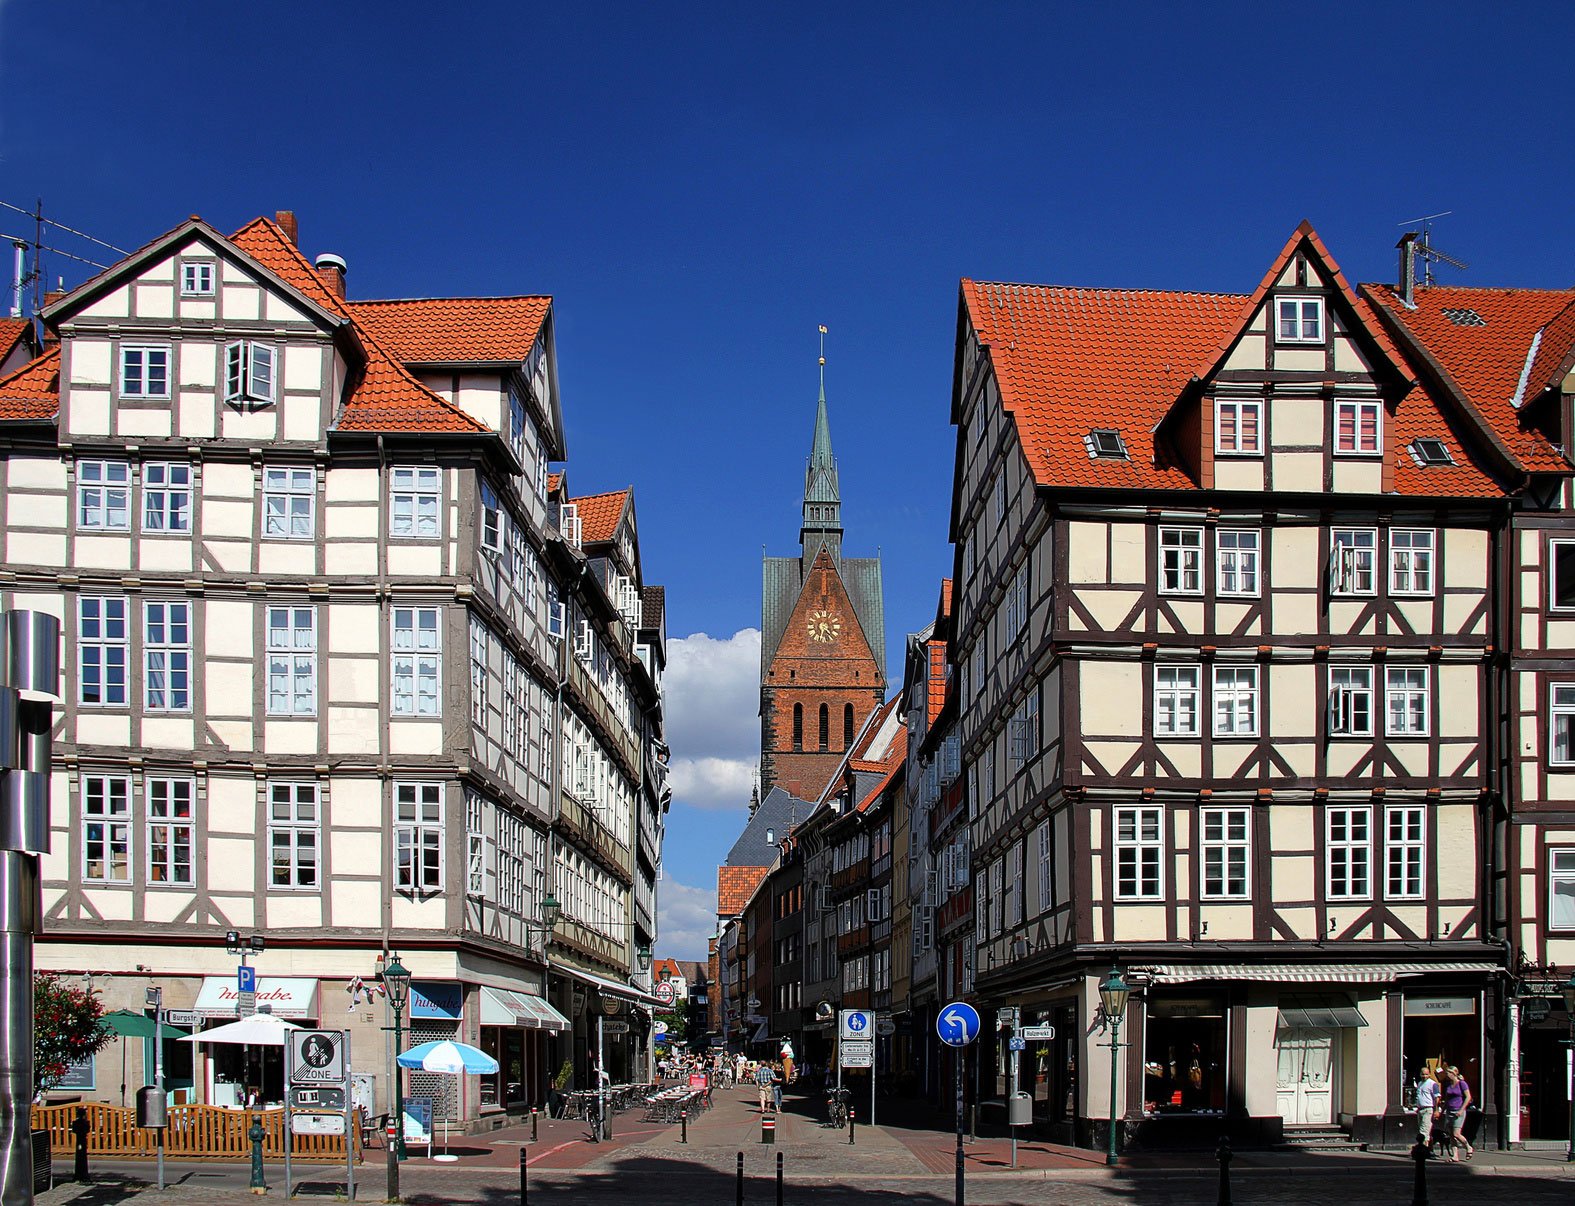 Few pedestrians are passing through the historic centre of Hanover